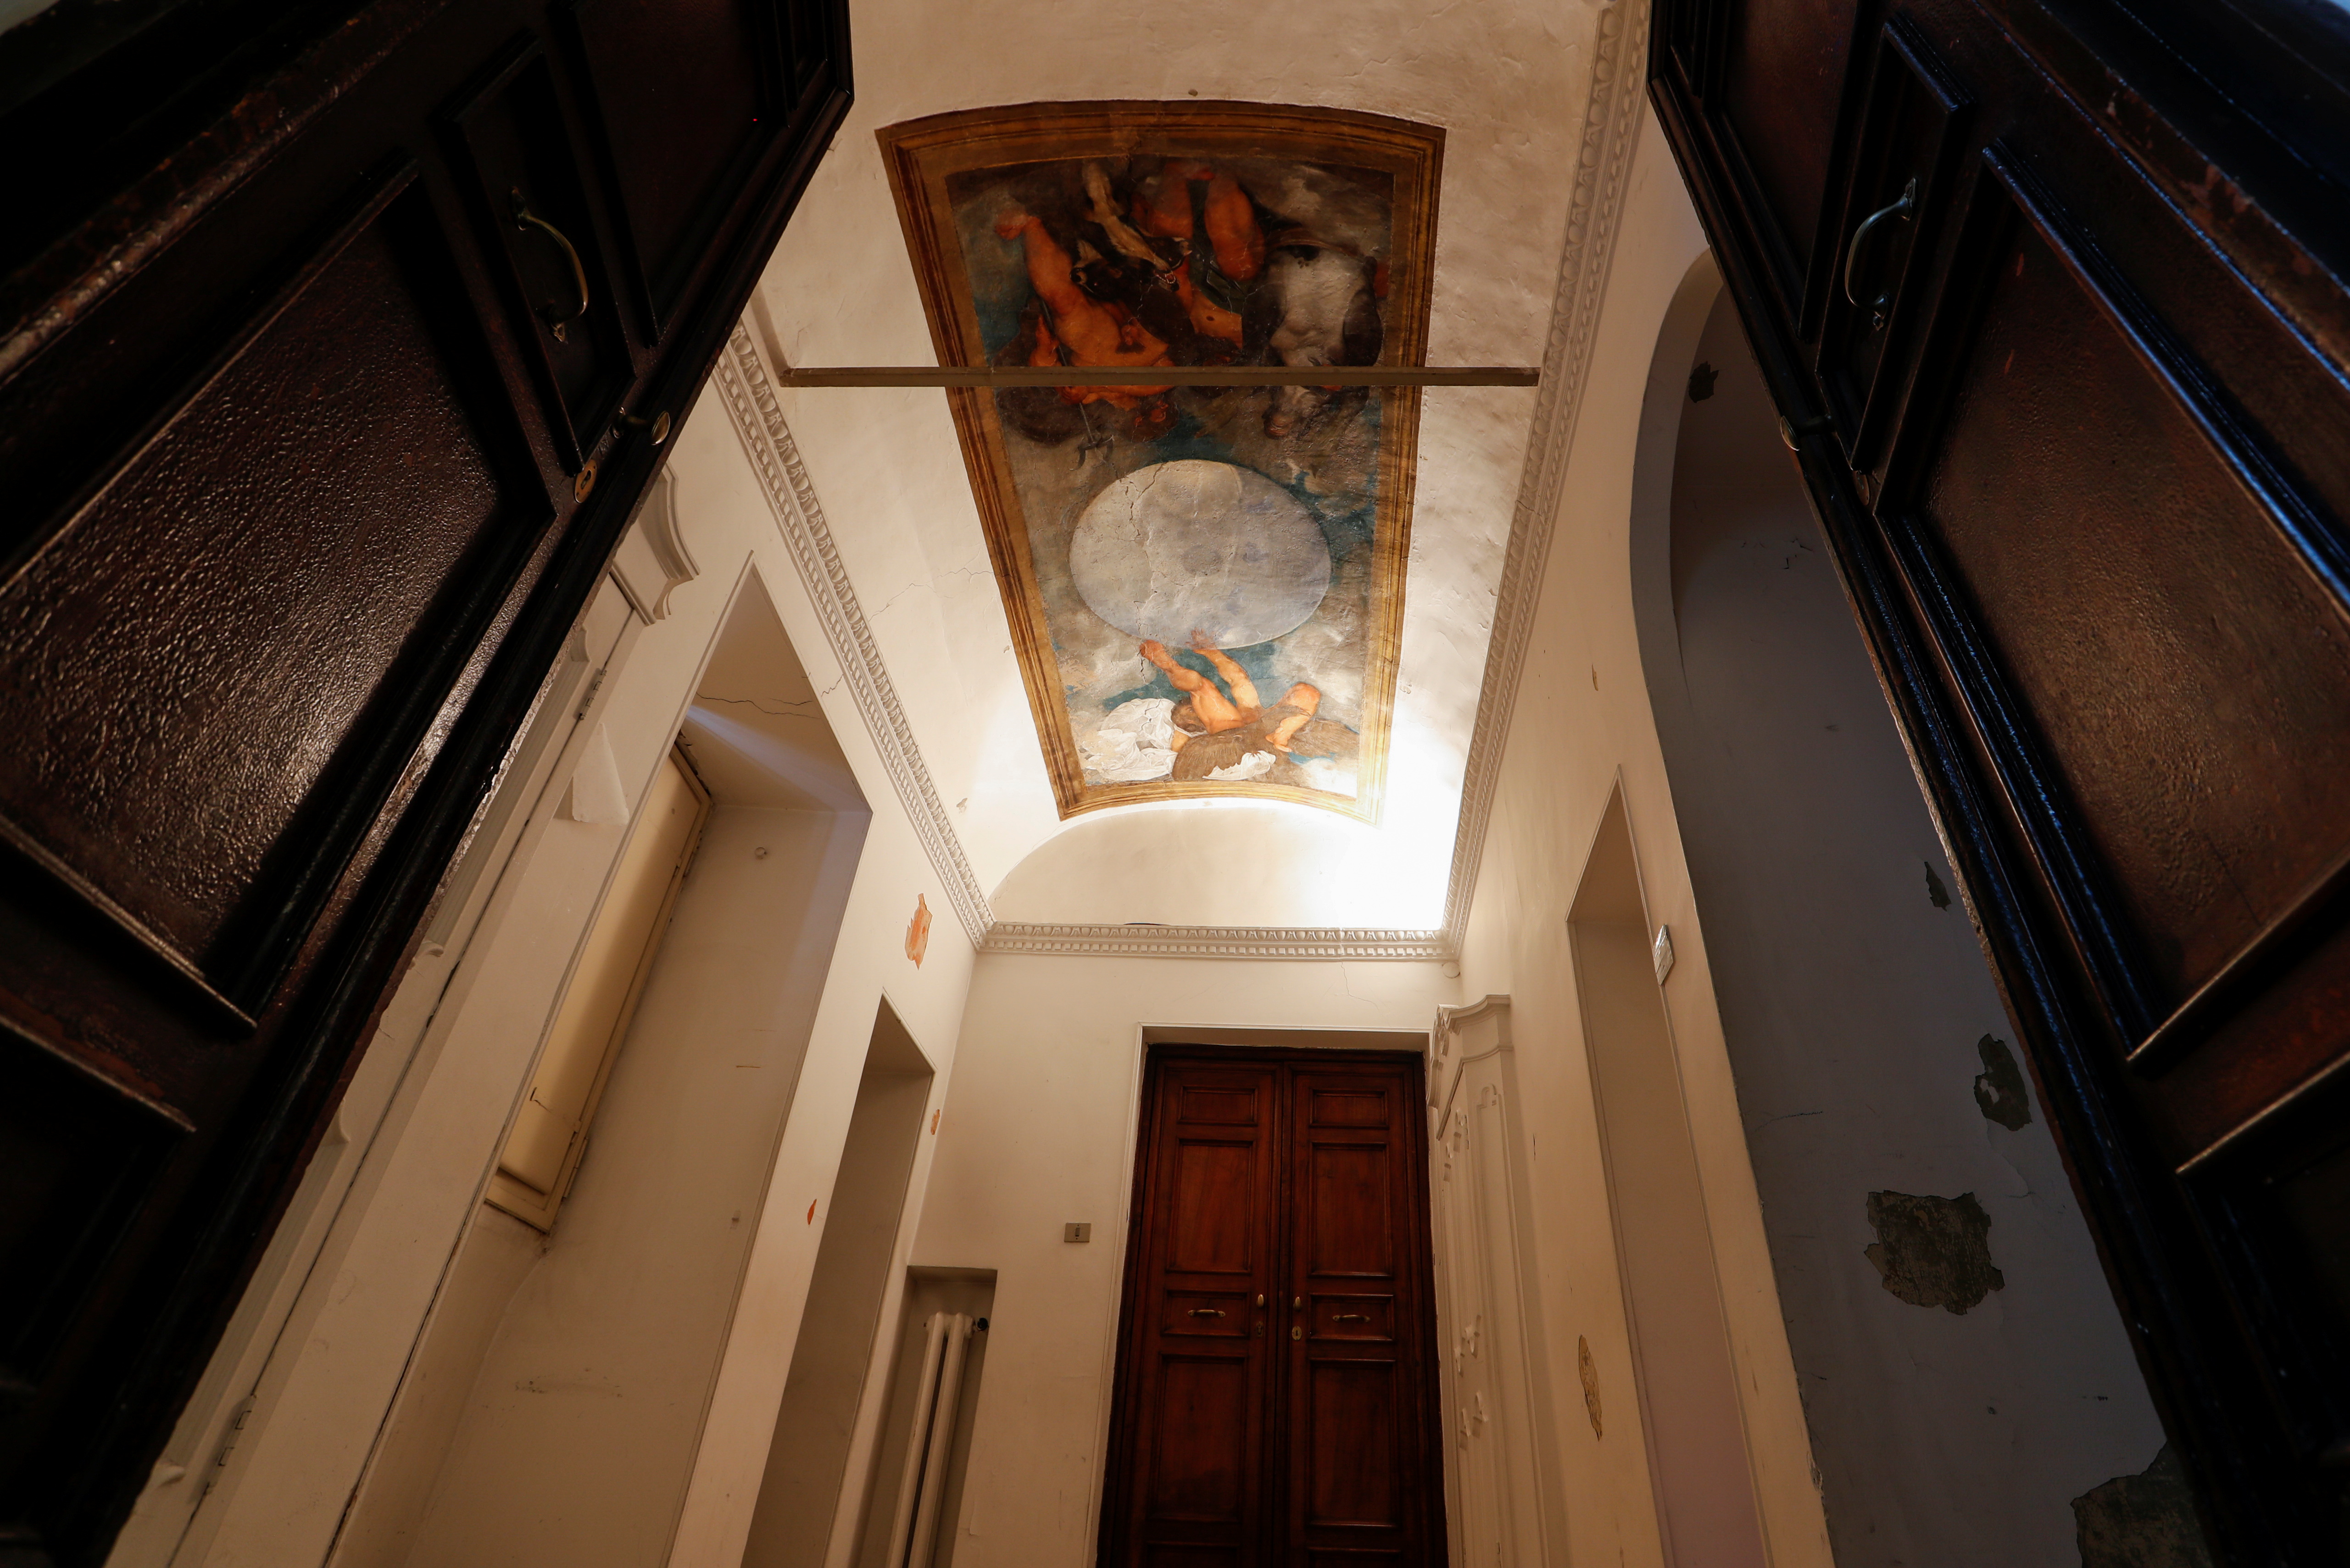 Rome's Villa Aurora will be up for auction in January for almost 500 million euros